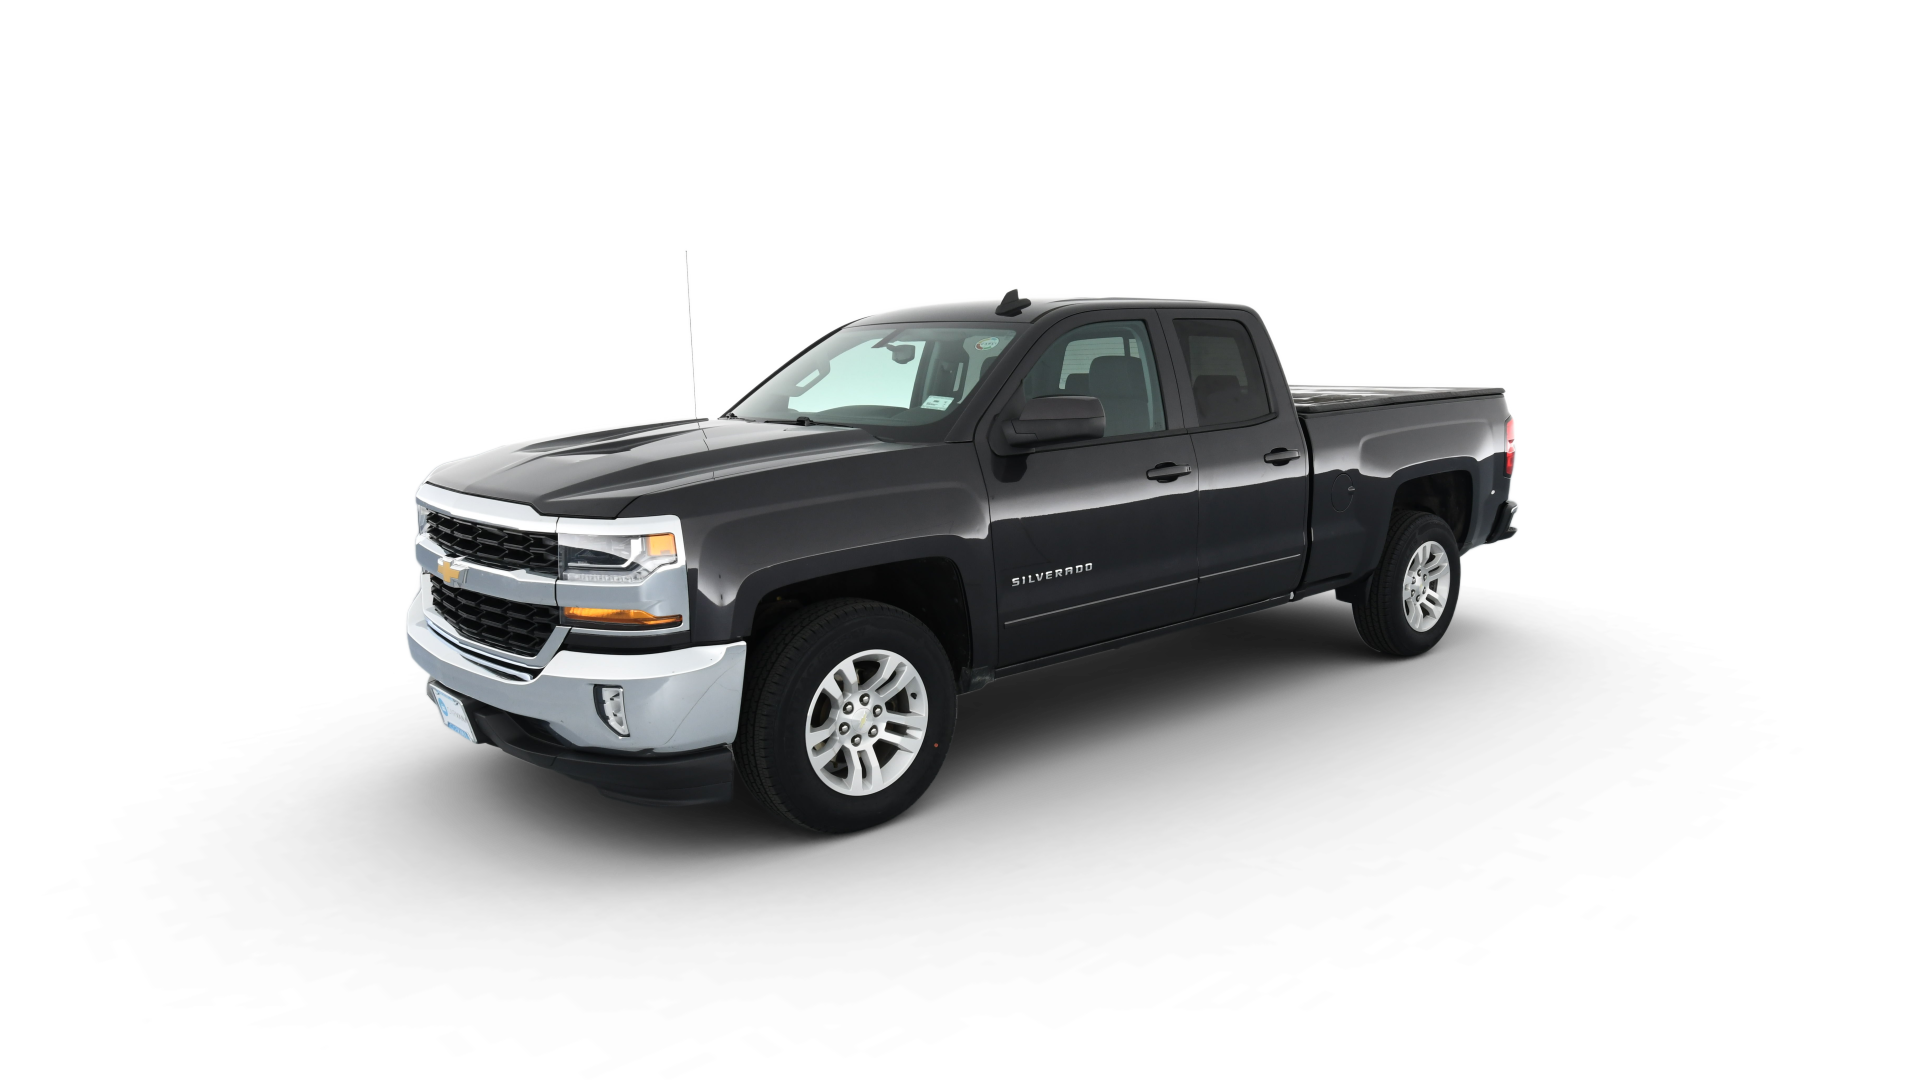 Used 2016 Chevrolet Silverado 1500 Double Cab for Sale Online